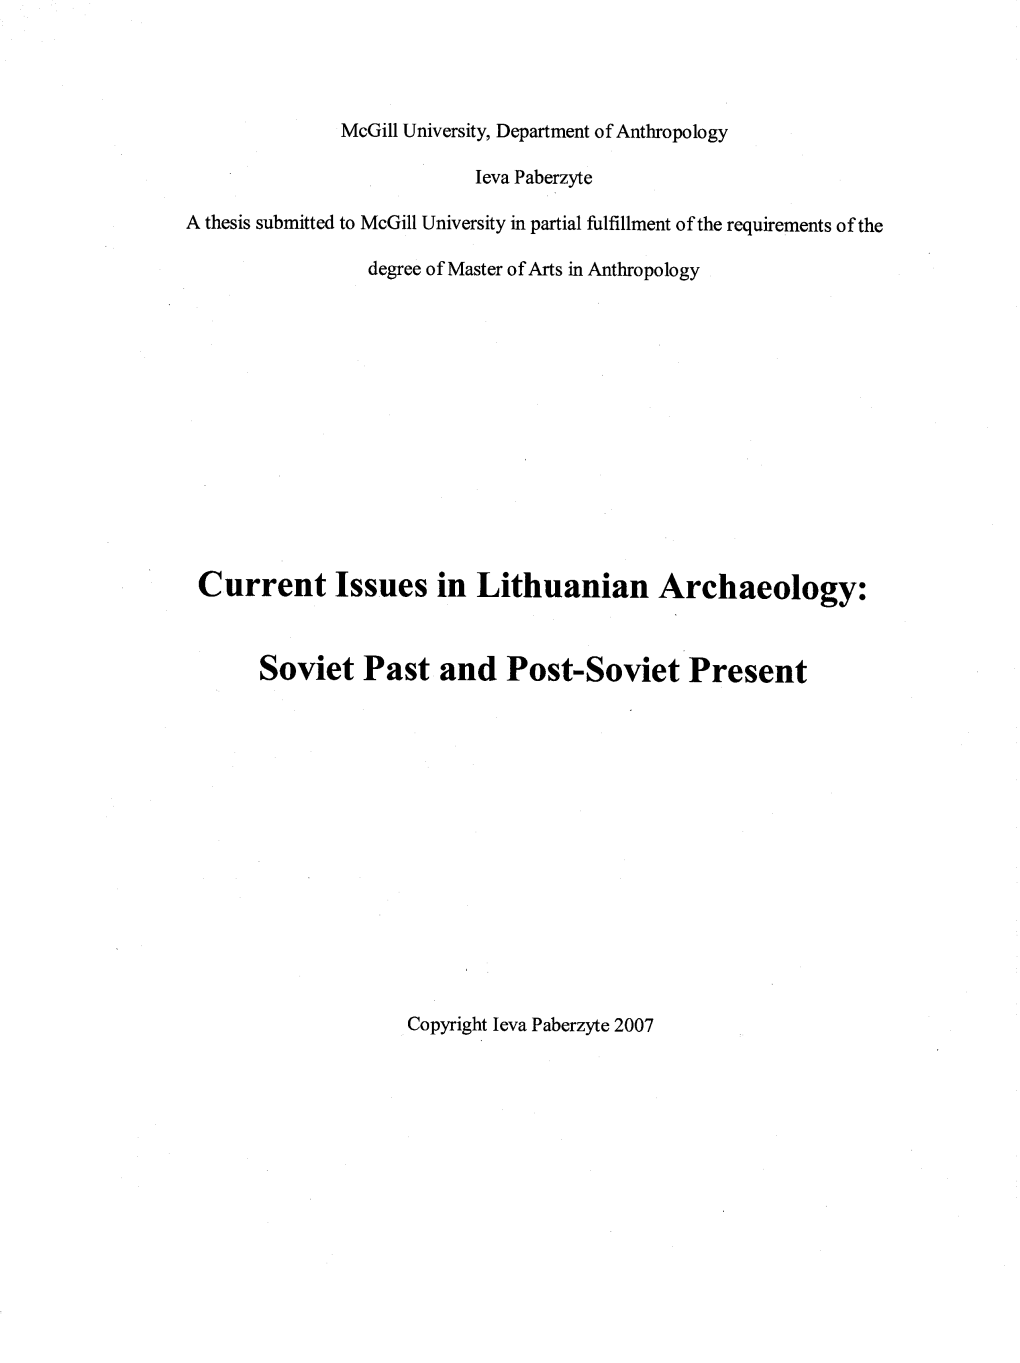 Current Issues in Lithuanian Archaeology